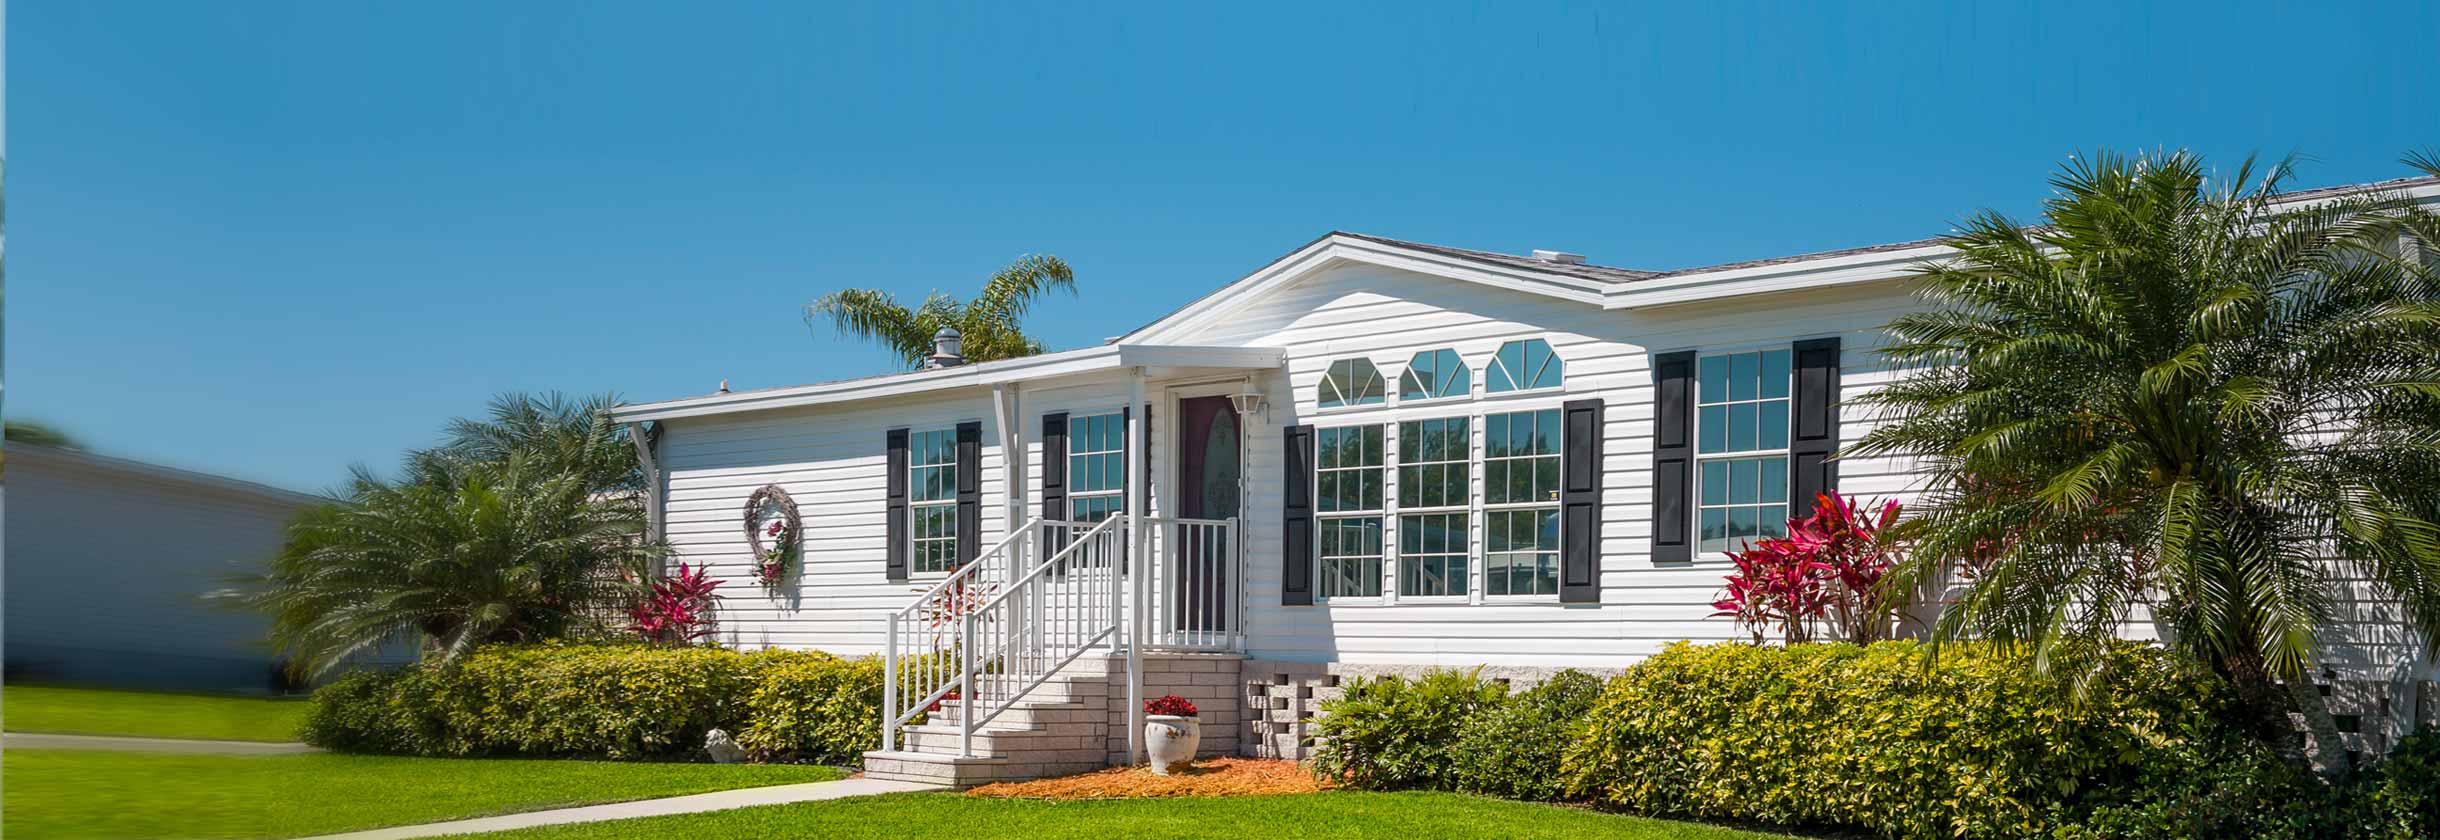 Manufactured Housing / Mobile Home Loans